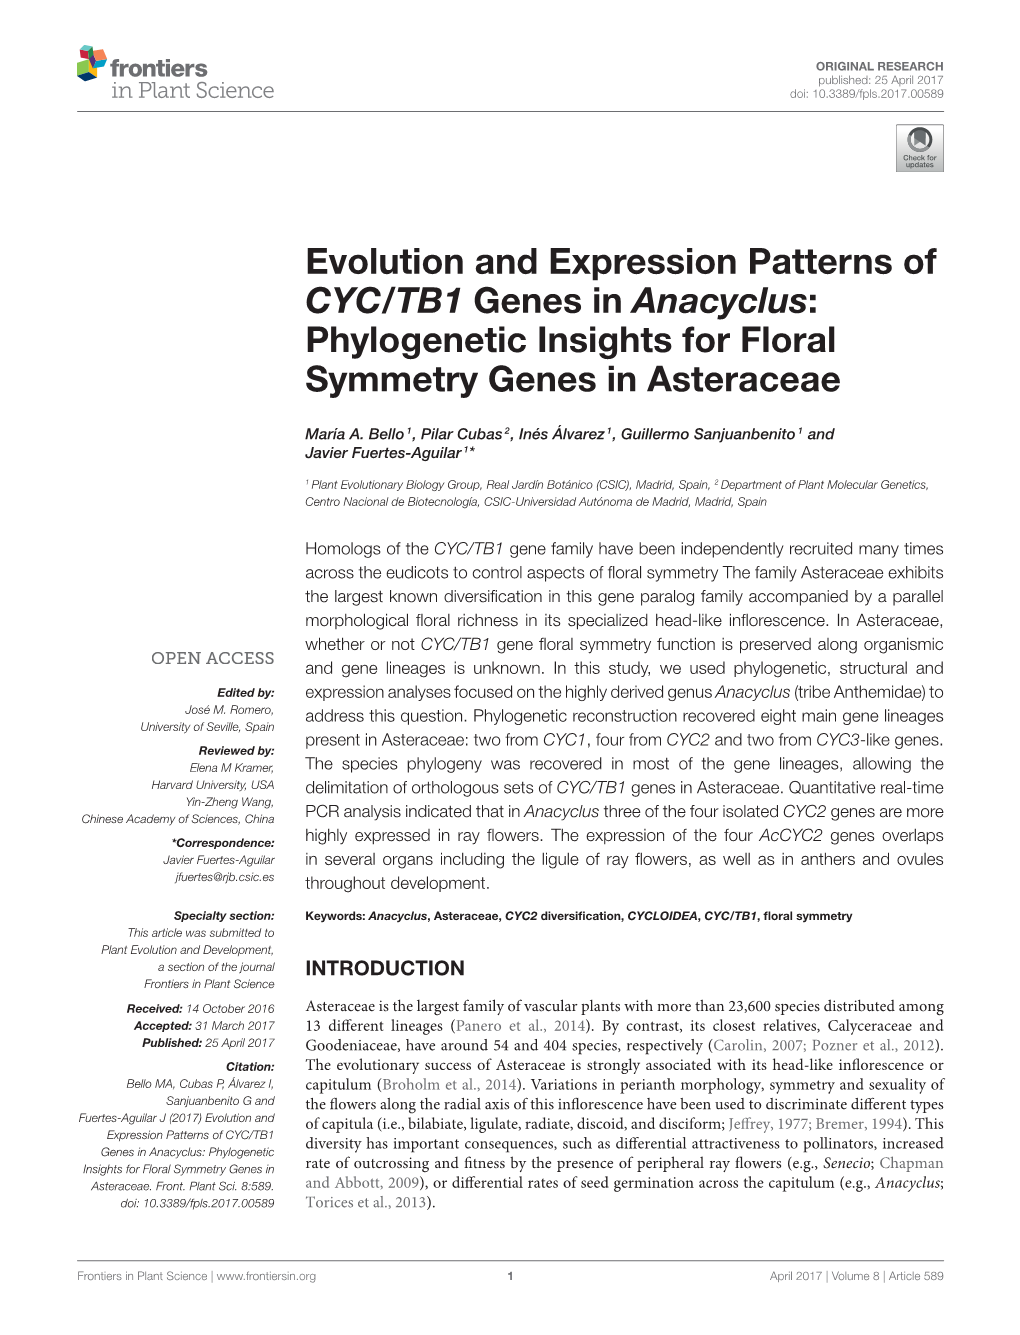 Evolution and Expression Patterns of CYC/TB1 Genes in Anacyclus: Phylogenetic Insights for Floral Symmetry Genes in Asteraceae